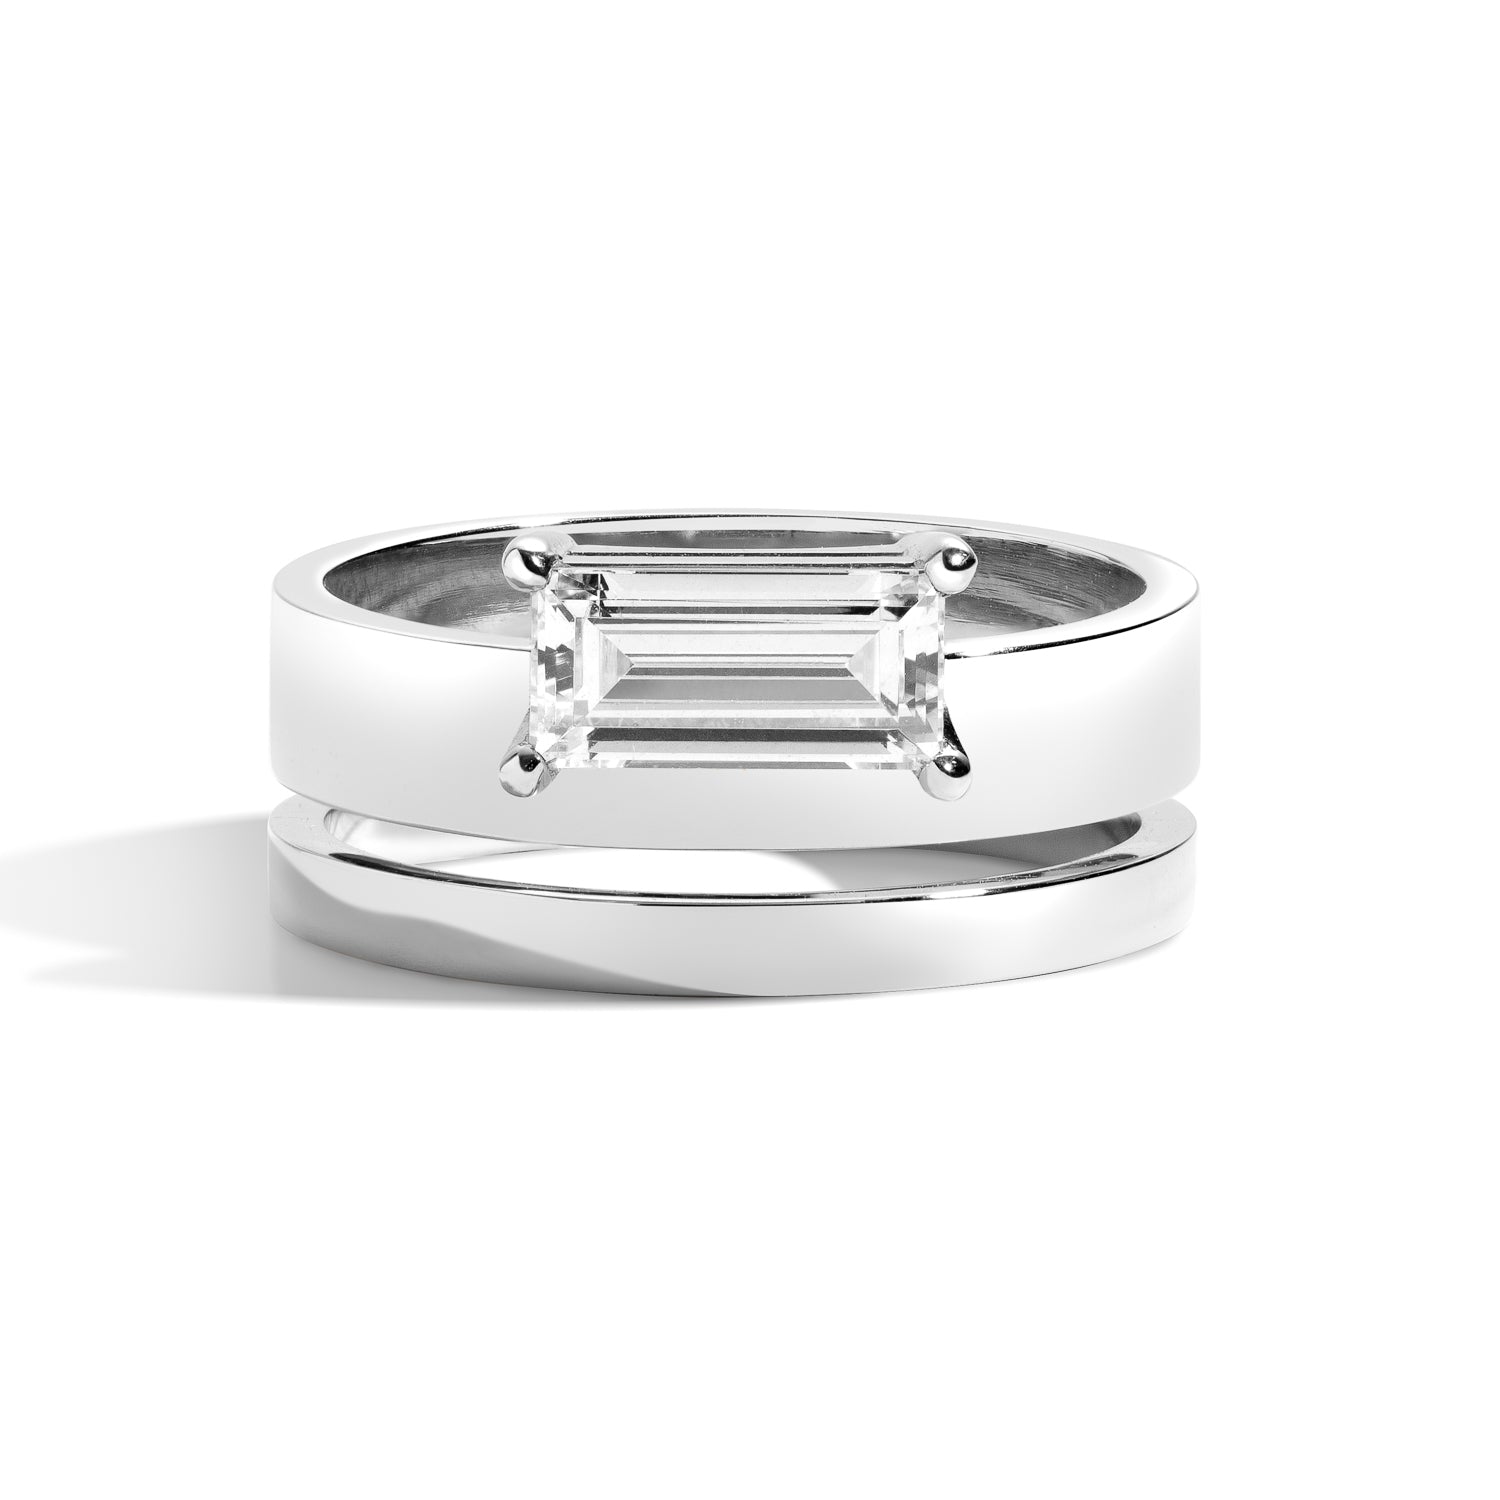 Shahla Karimi Jewelry East-West Baguette Offset Double Ring 14K White Gold or Platinum